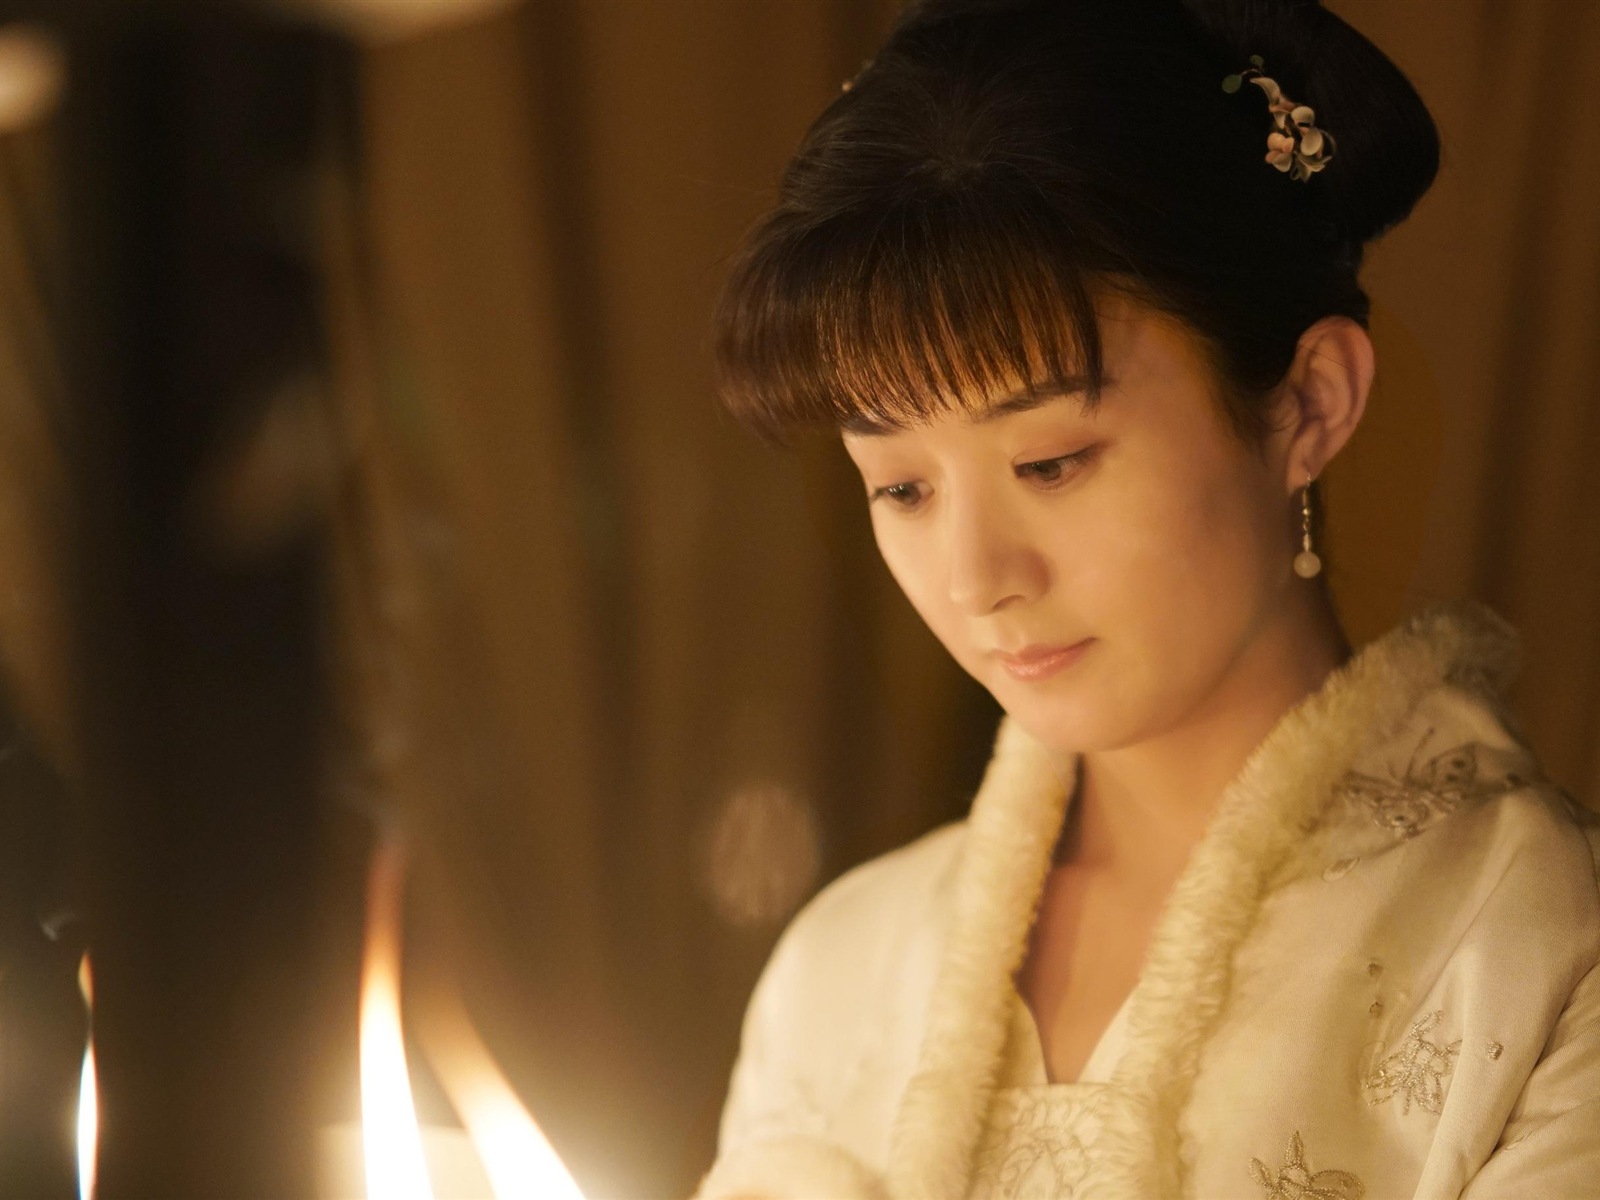 The Story Of MingLan, TV series HD wallpapers #41 - 1600x1200